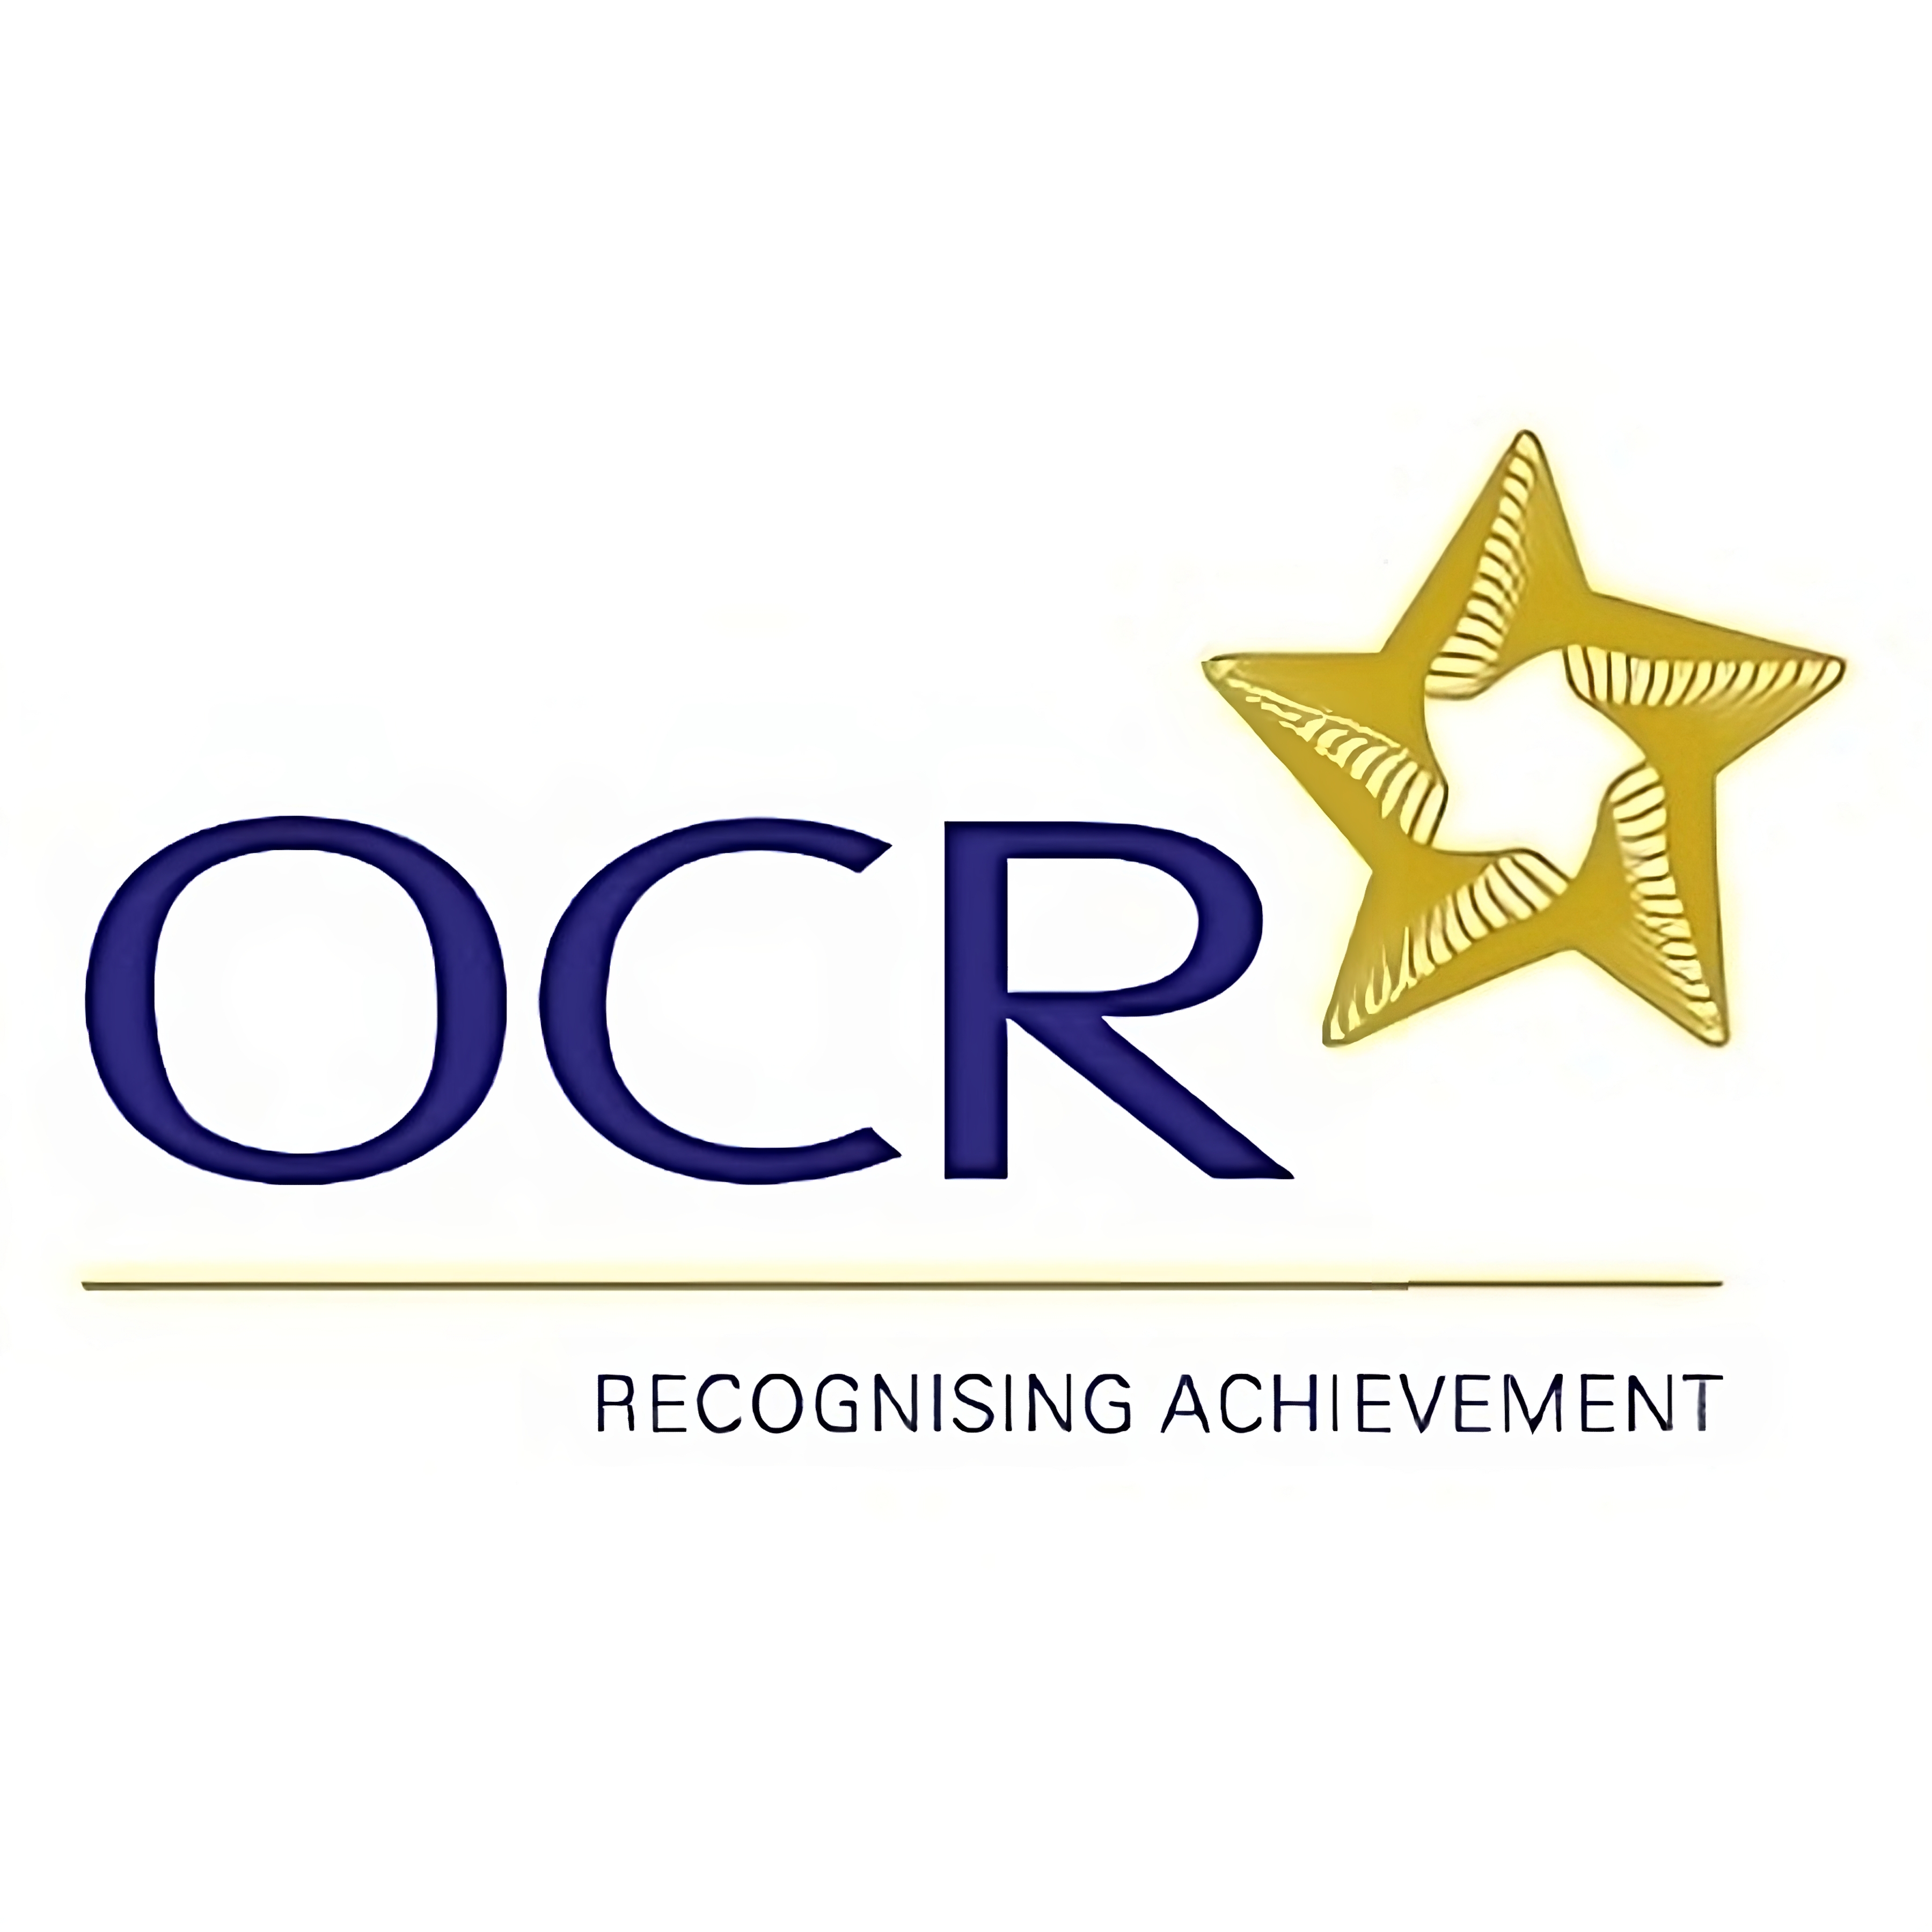 OCR logo, indicating Intuition Academy's experience in preparing students for Oxford, Cambridge, and RSA Examinations.